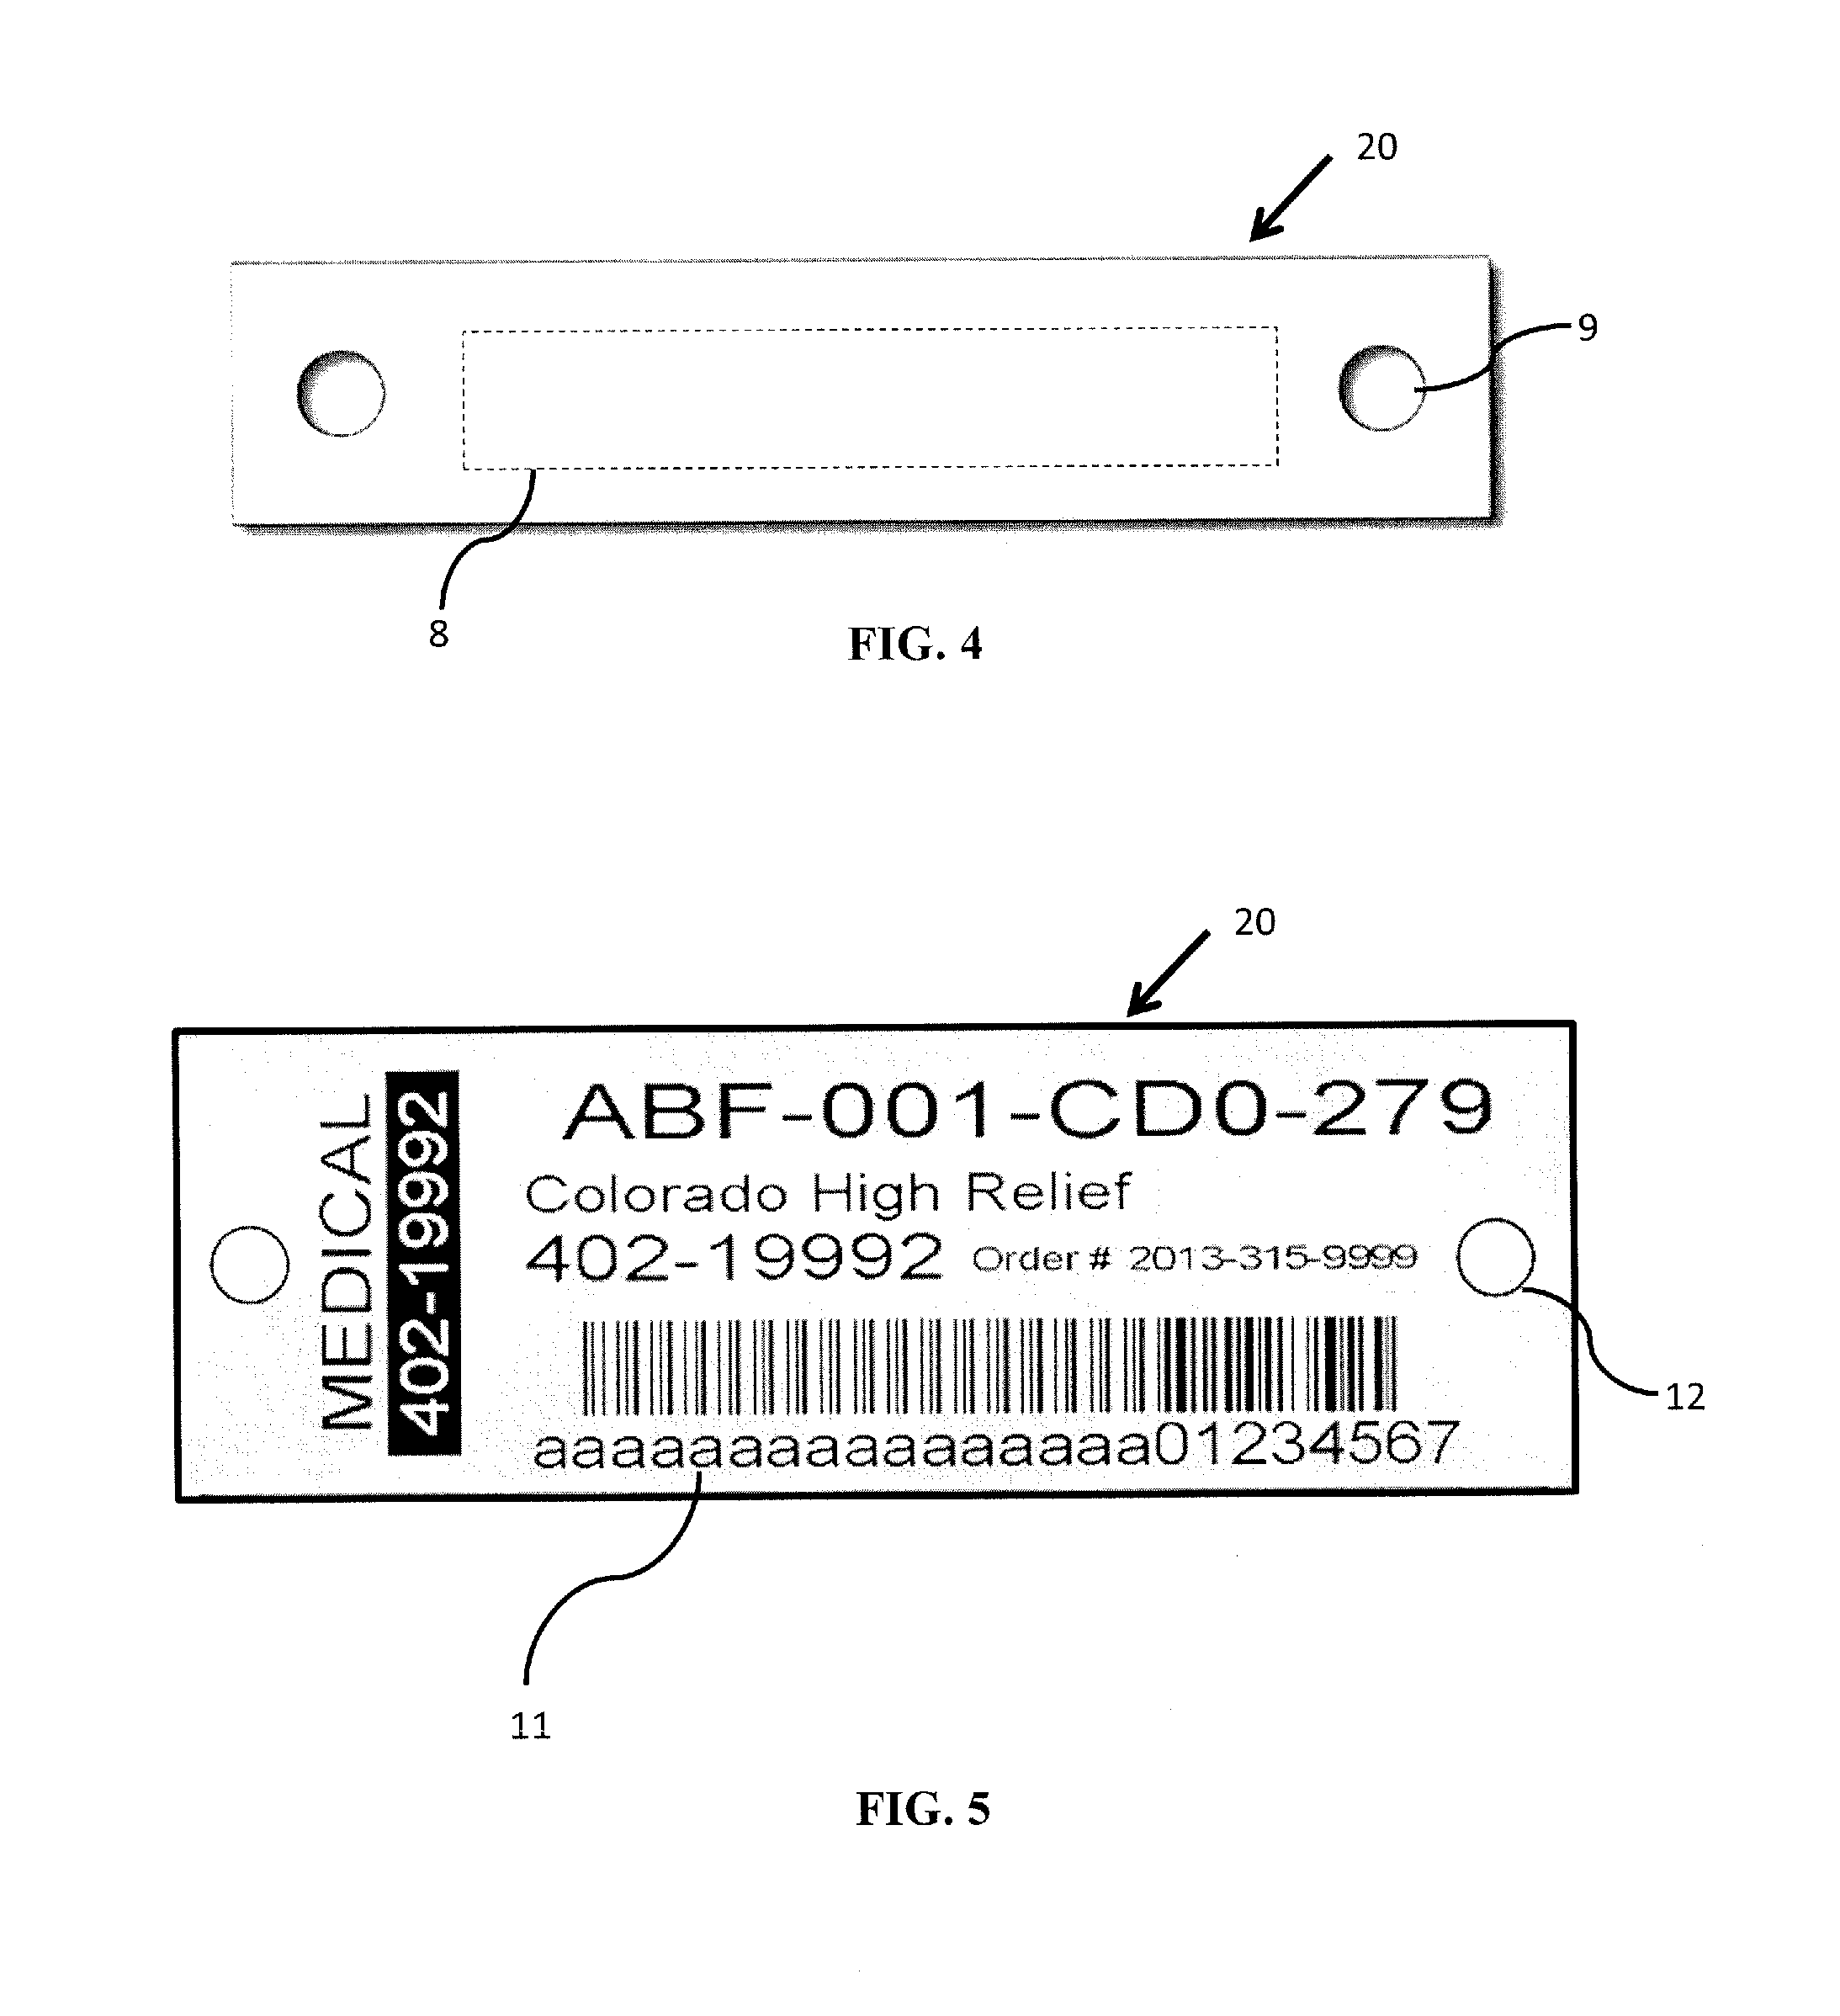 Method and apparatus for tracking one or more plants and/or  plant based products and/or tracking the sale of products derived from the same, utilizing RFID technology